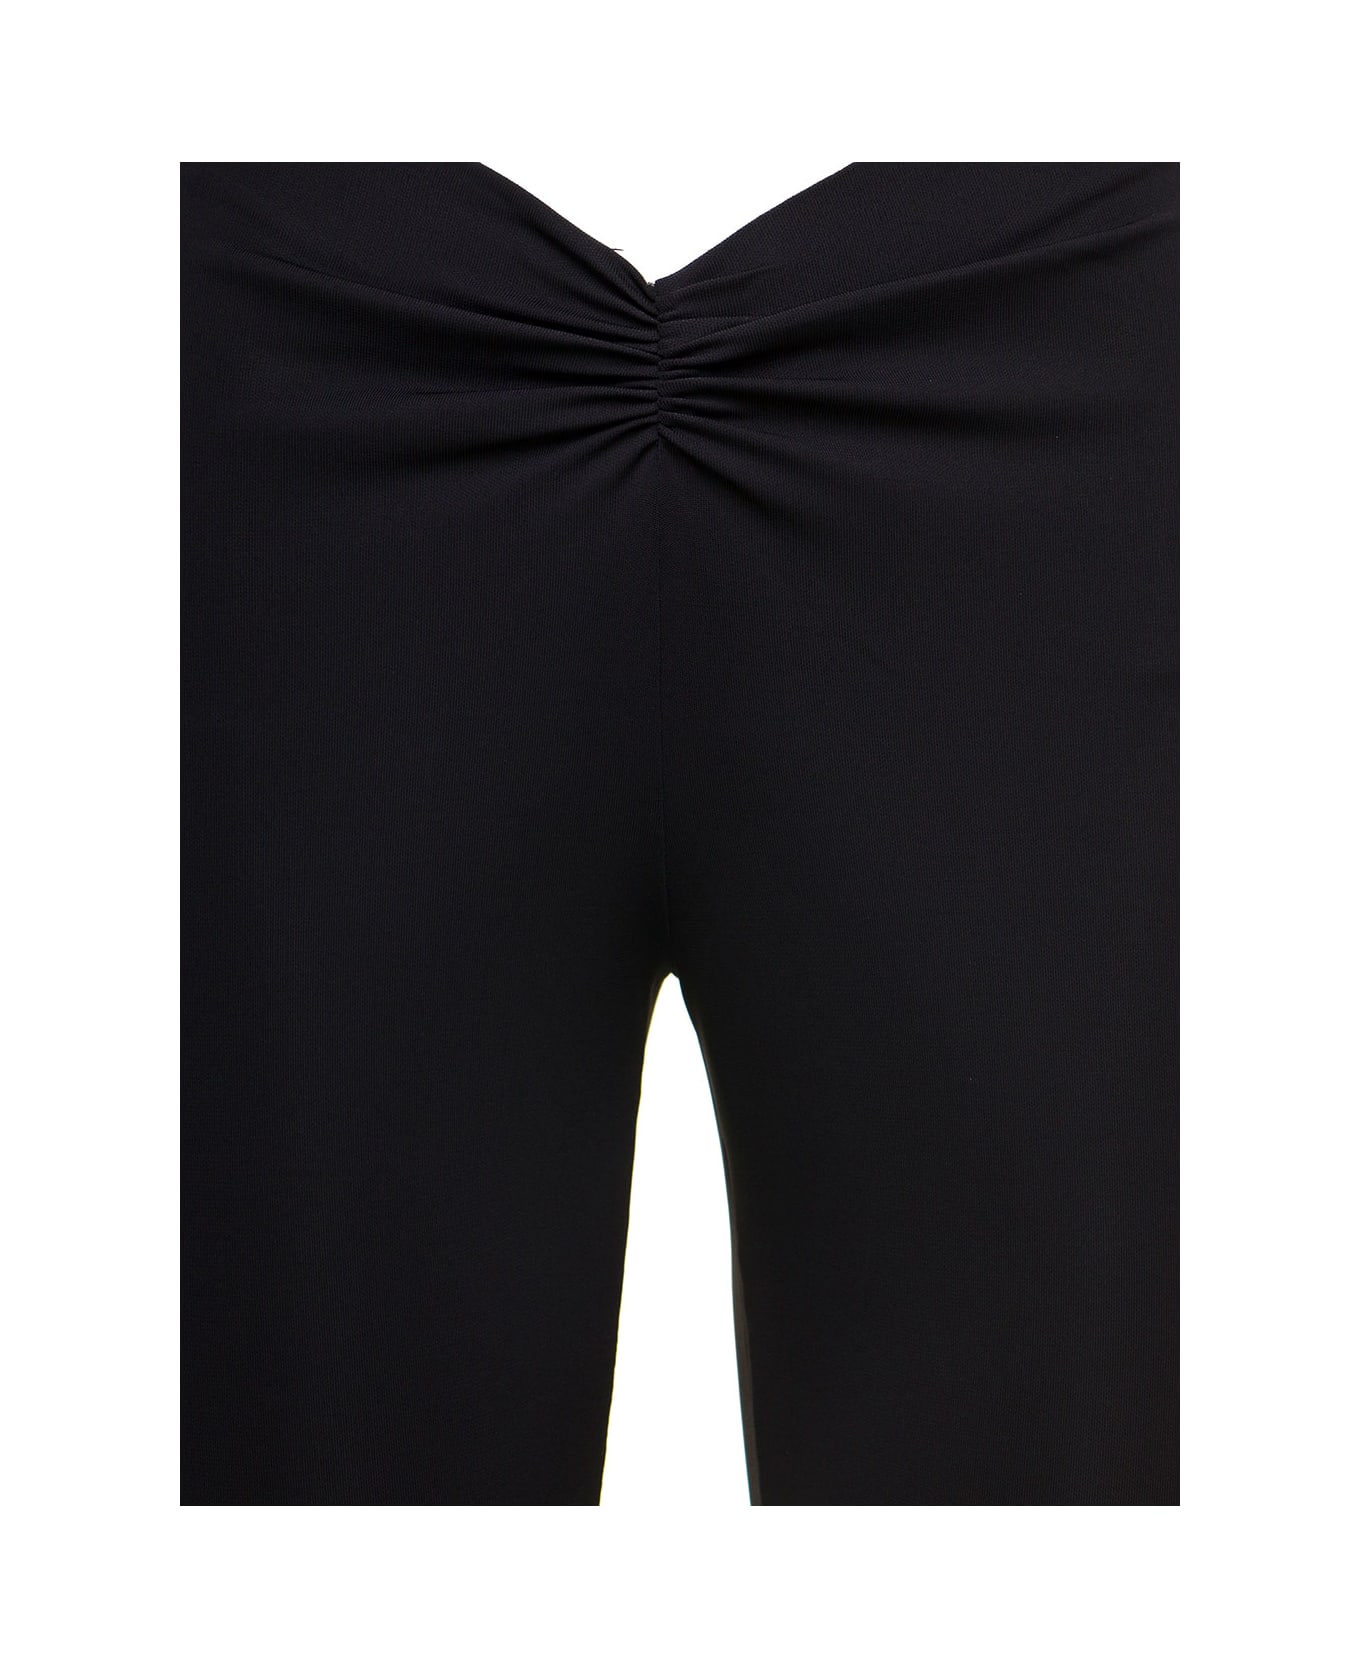 The Andamane Black Maxi Flare Pants With Ruched Detail In Polyester Woman - Black